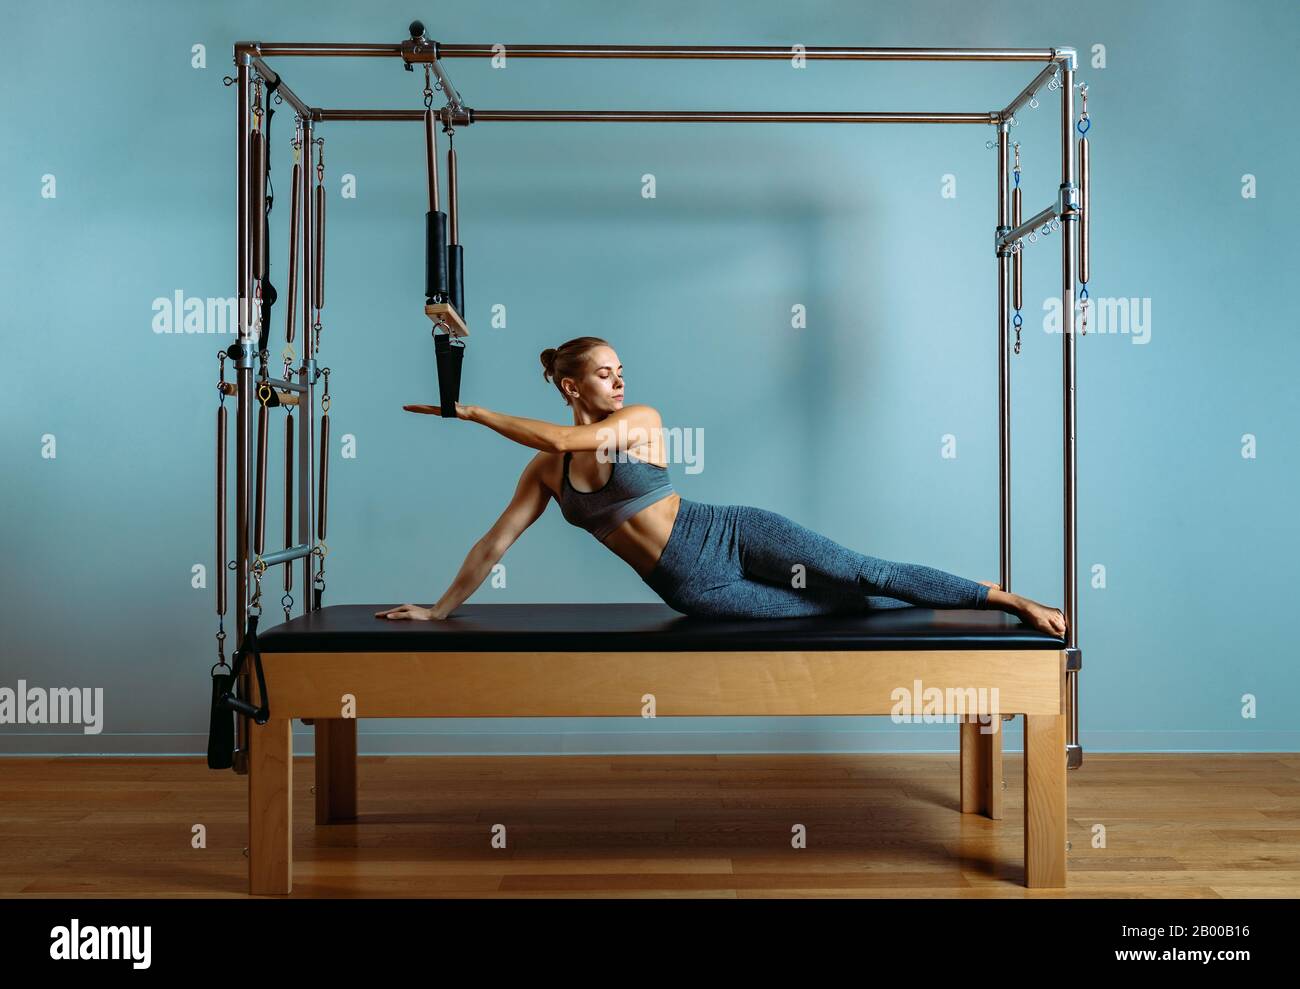 https://c8.alamy.com/comp/2B00B16/a-young-girl-does-pilates-exercises-with-a-bed-reformer-barrel-machine-tool-beautiful-slim-fitness-trainer-on-the-background-of-a-reformer-doing-var-2B00B16.jpg